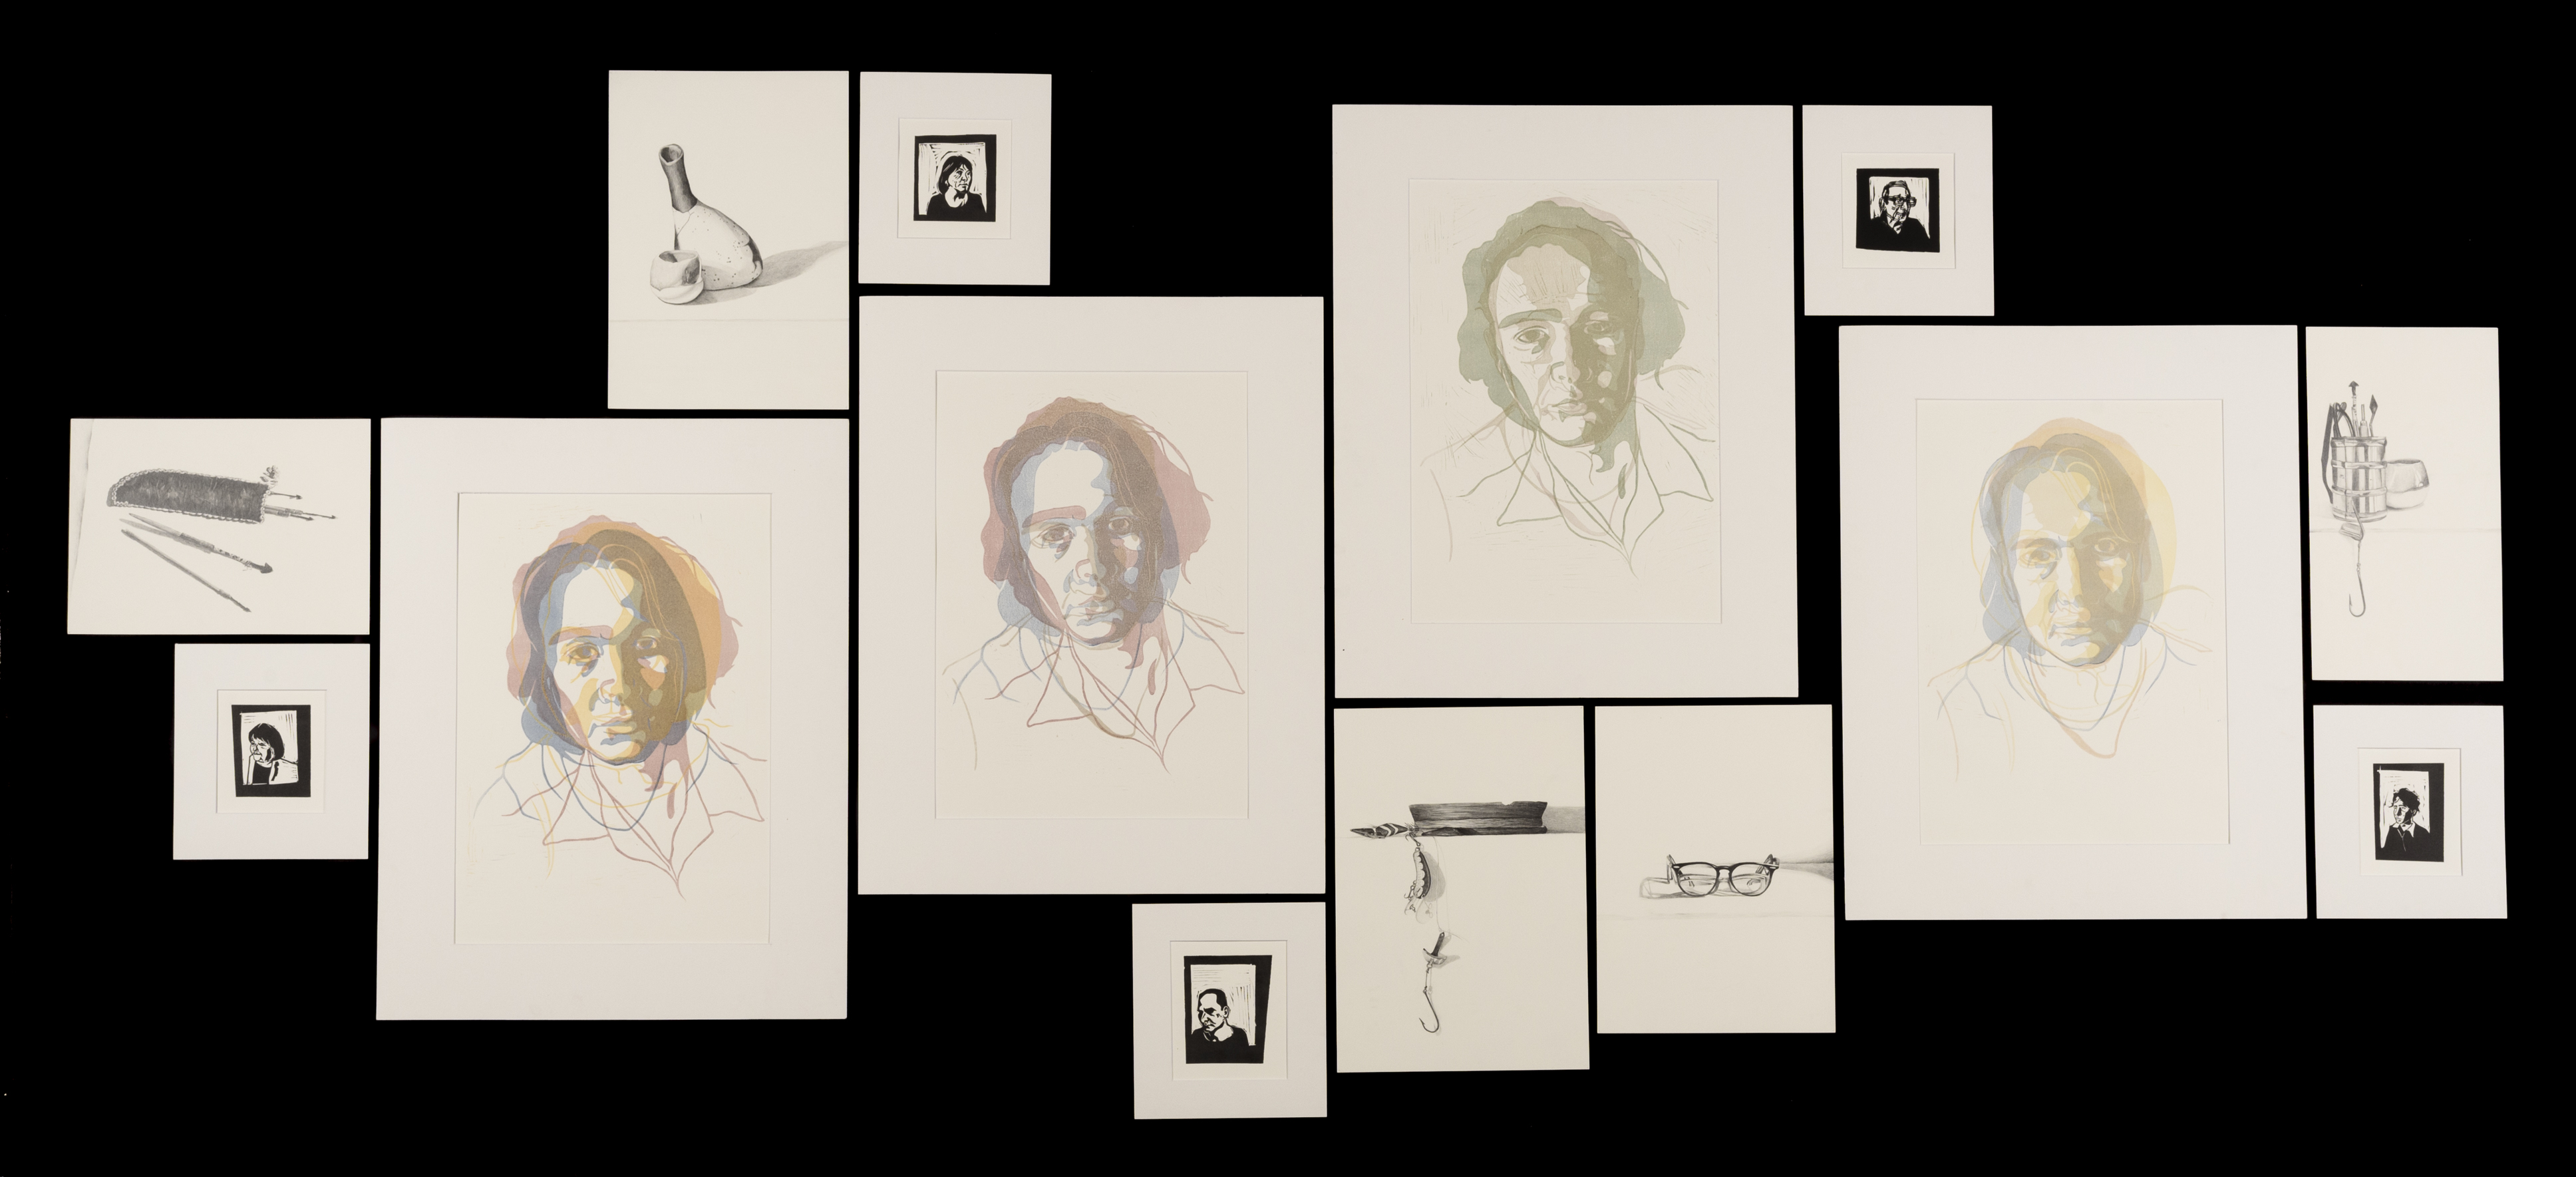 A series of four large portraits made up of overlayed prints, these are accompanied by four small lino-cut portraits and five small pencil drawings of personal items.